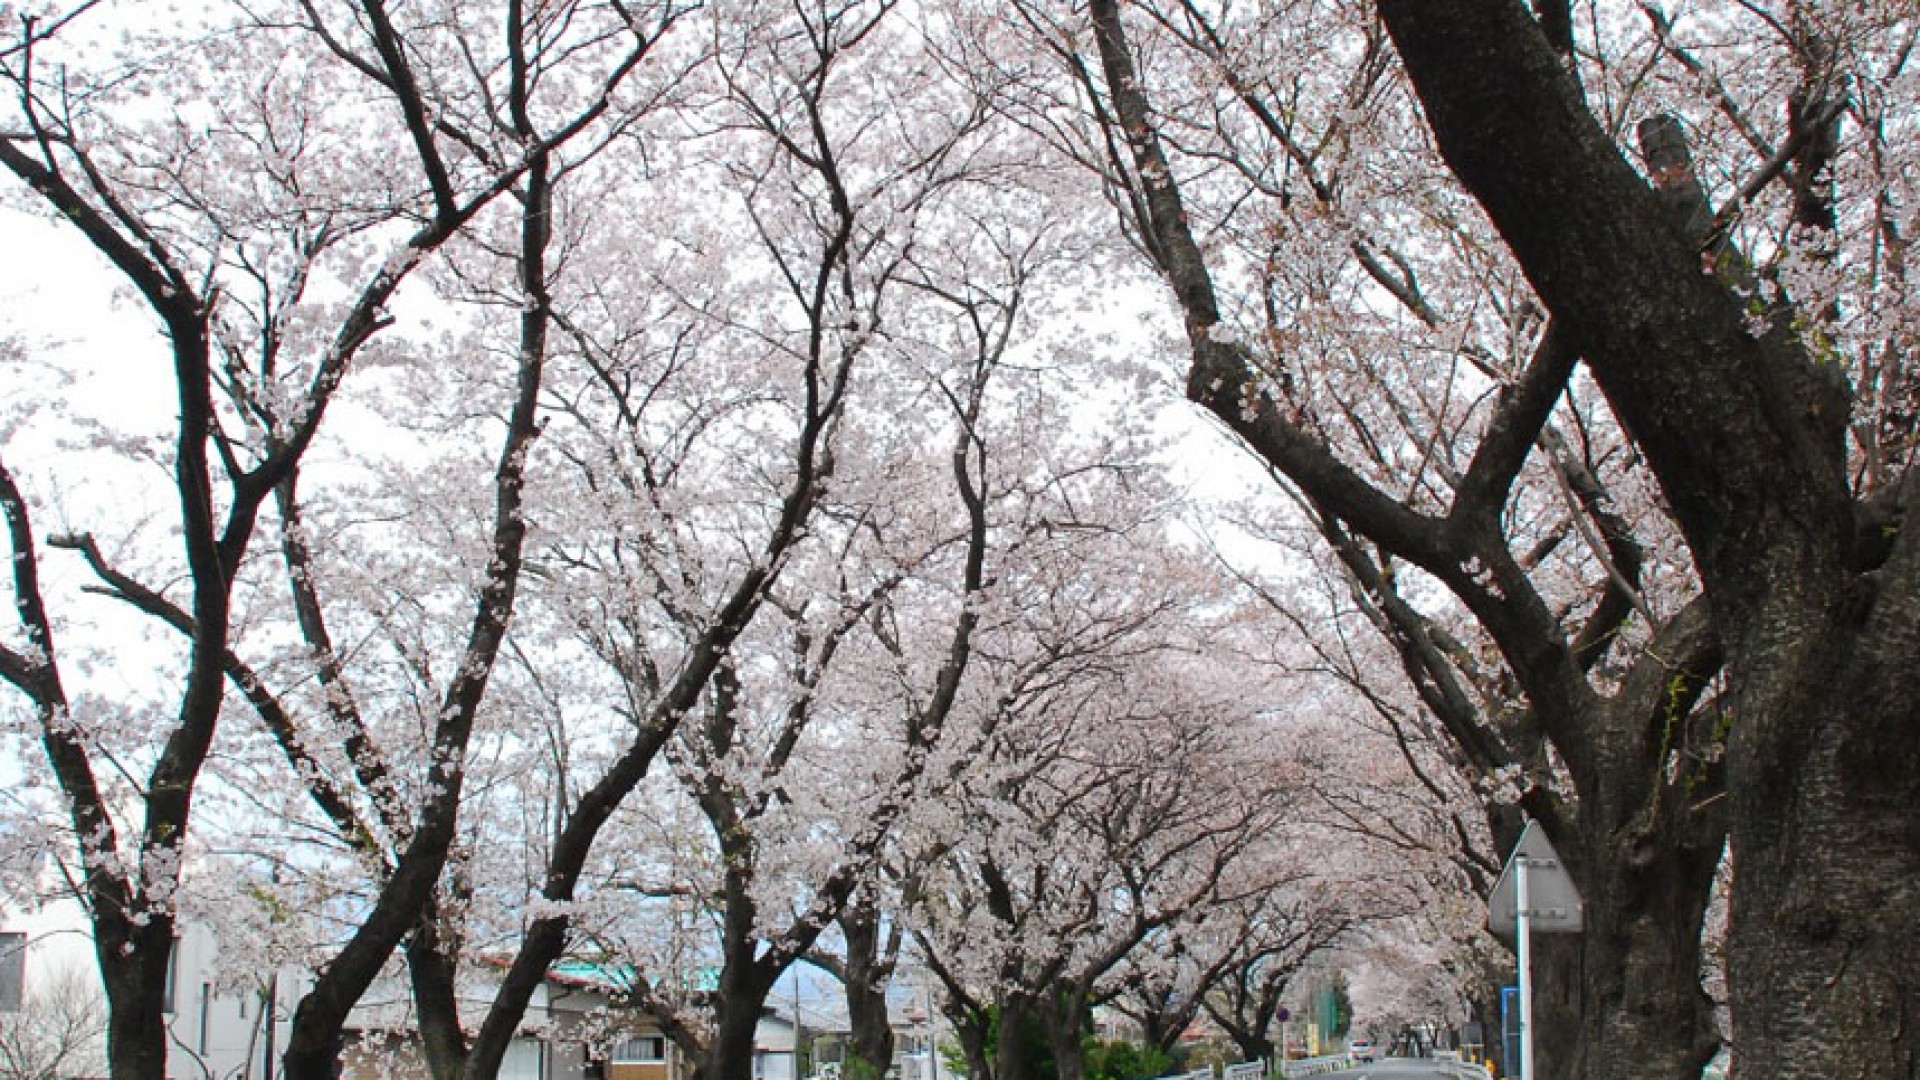 A row of cherry blossom trees at the confluence of three rivers